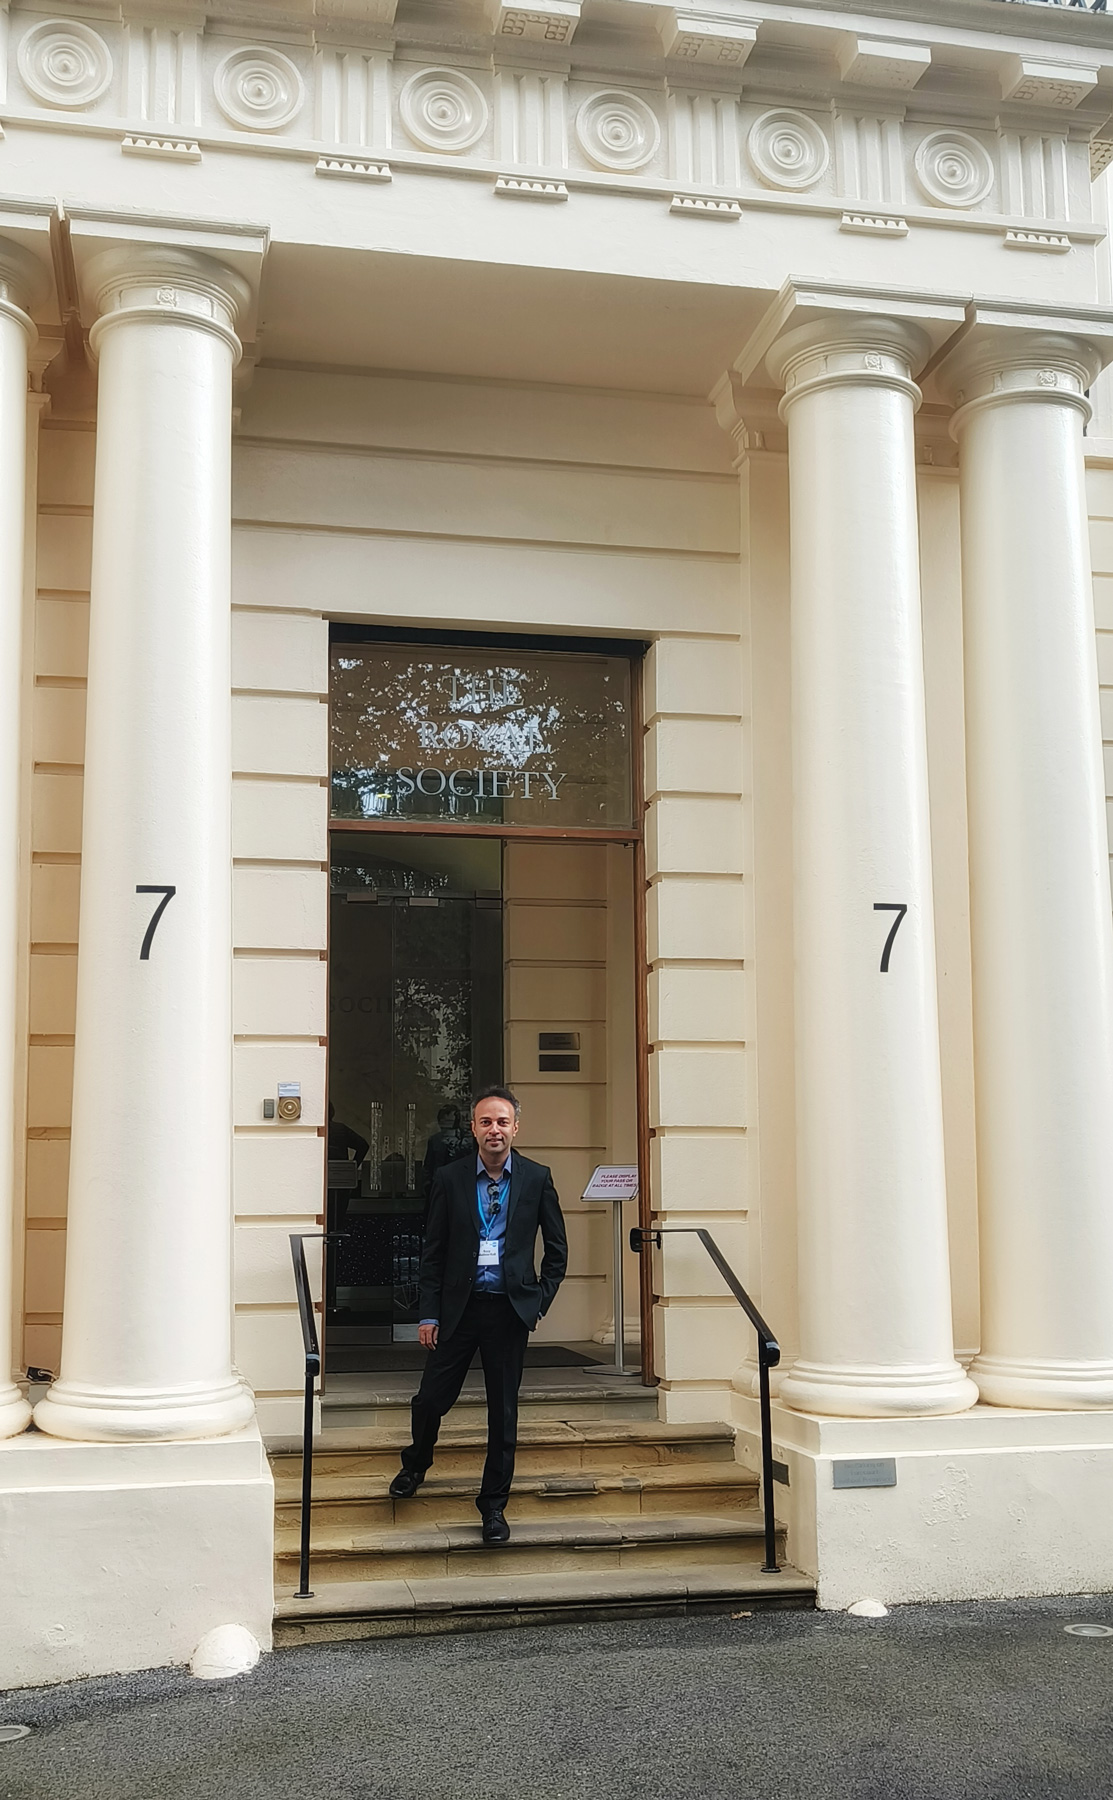 Roxy Koll at the Royal Society, London, for the 7th IPCC Assessment Report Scoping Workshop